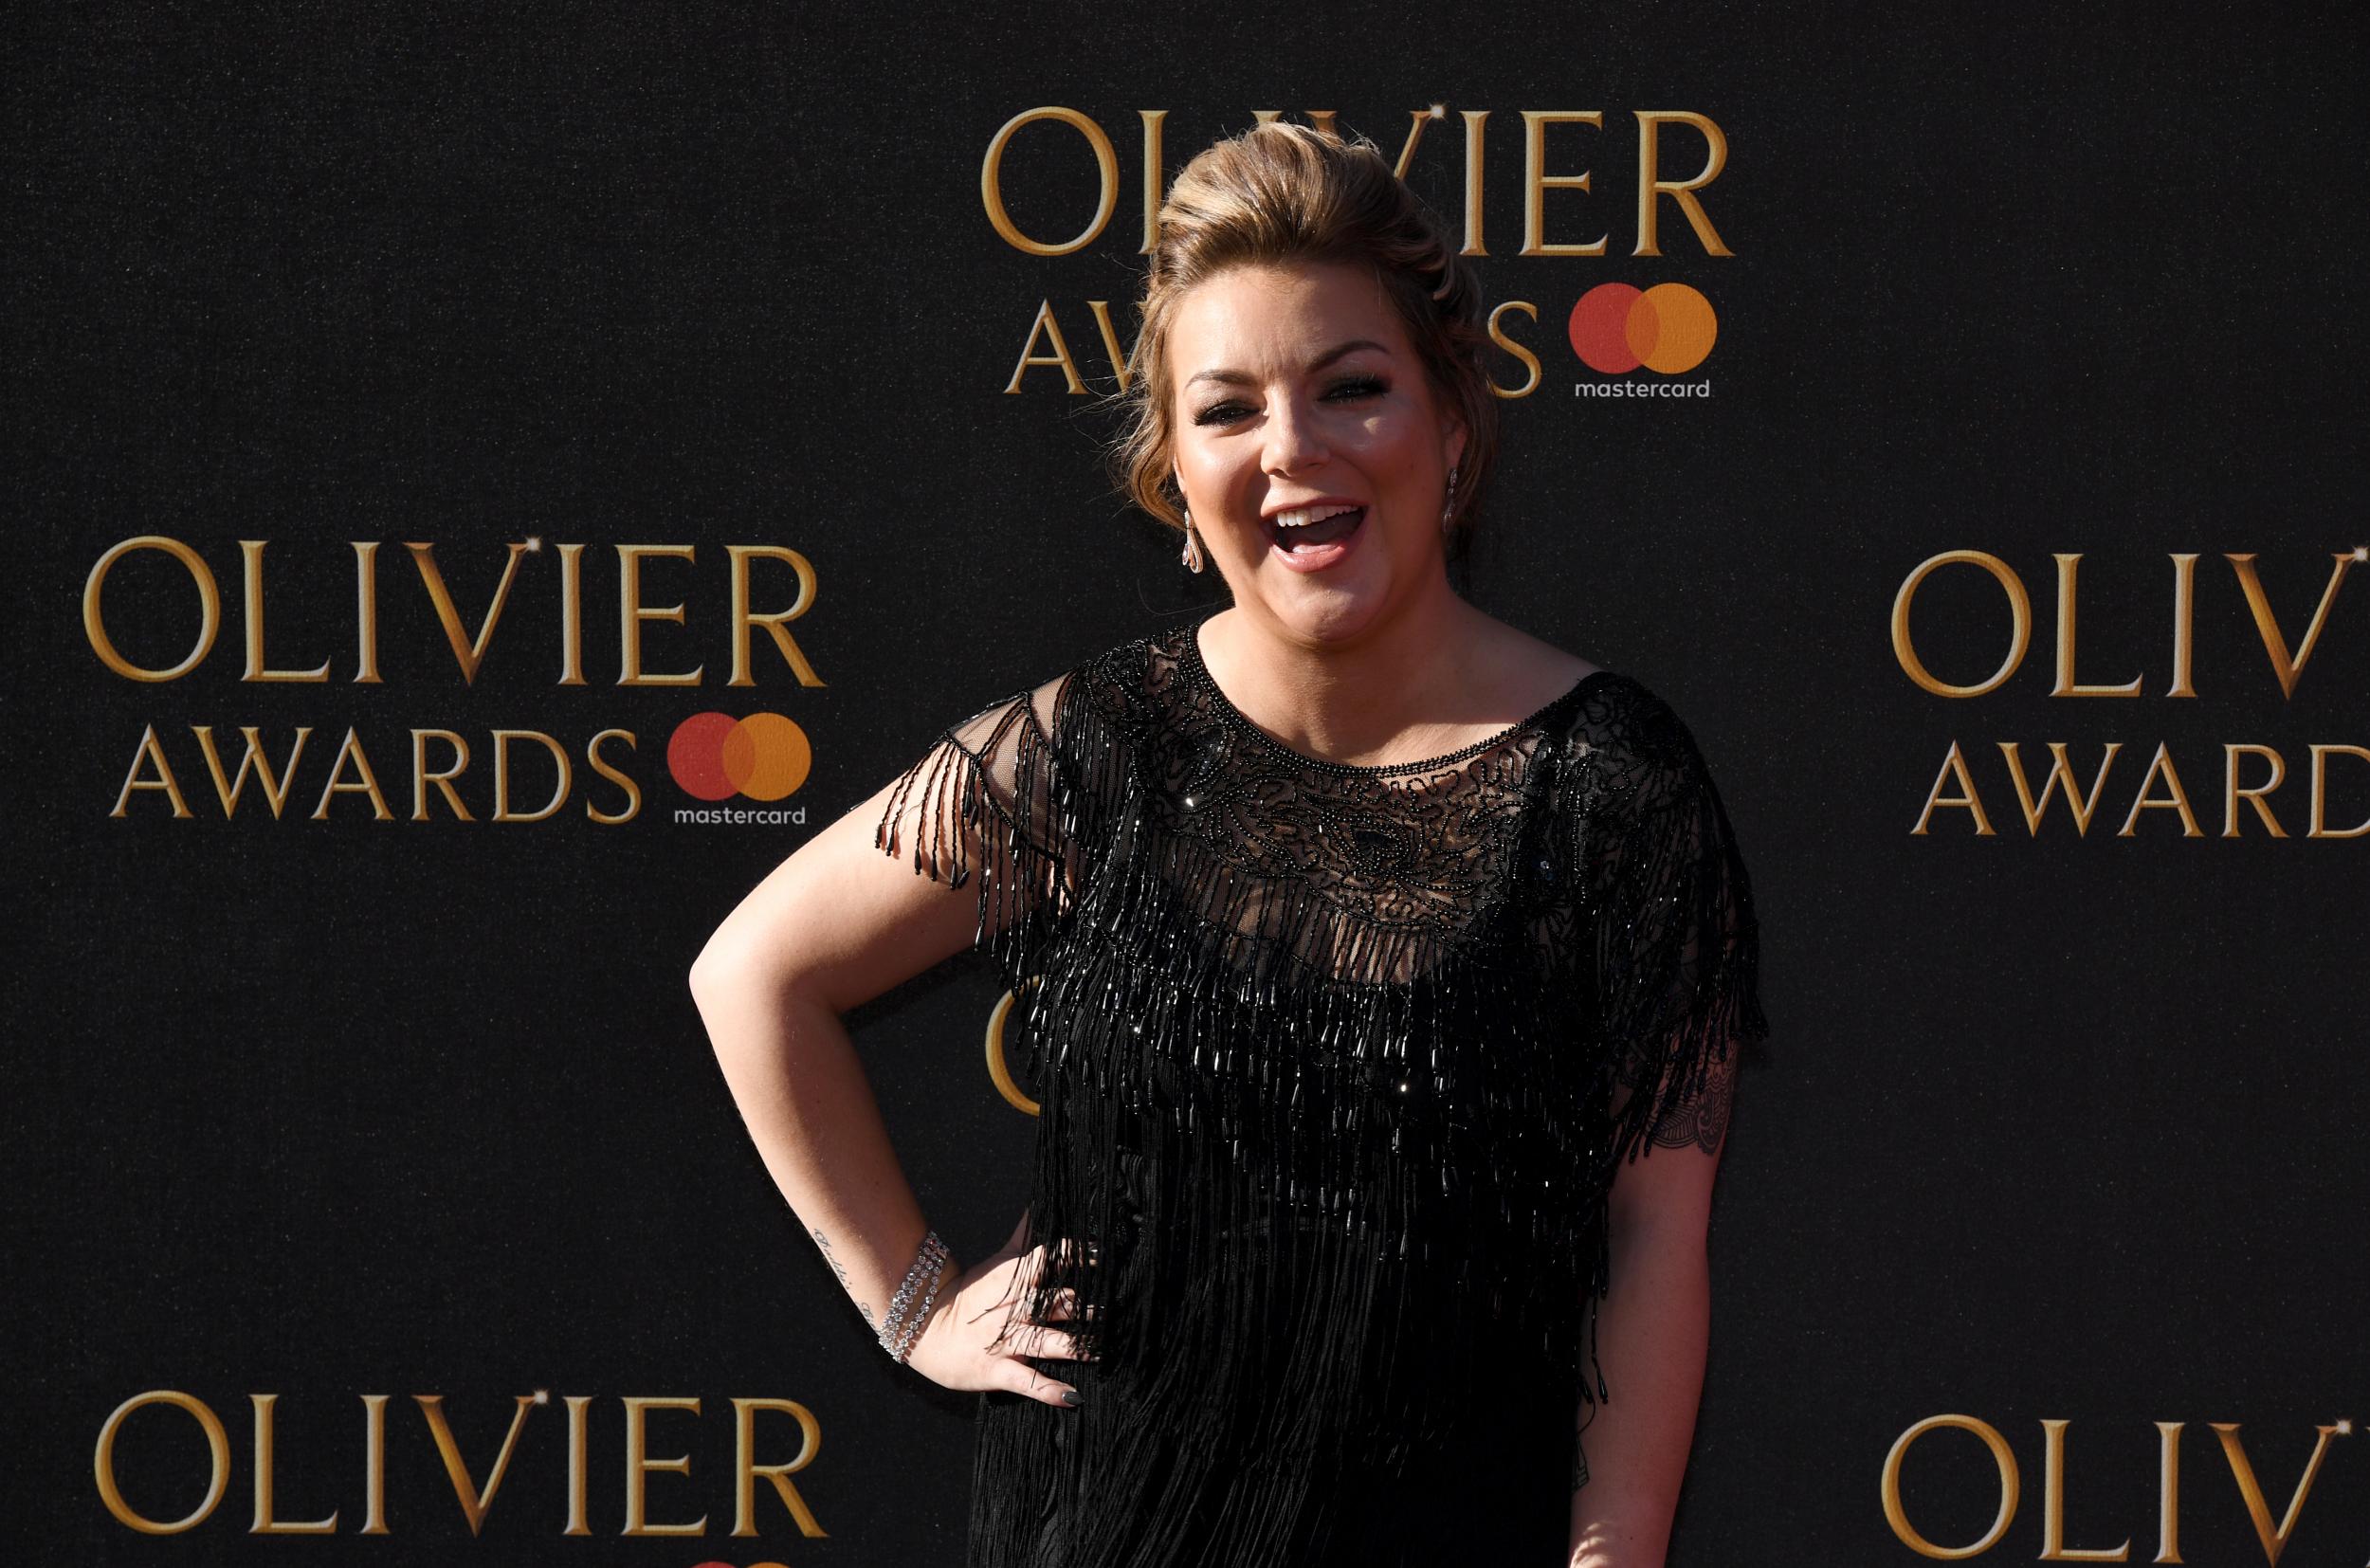 piper smith piper smith sheridan smith reveals struggle to lose weight after role london